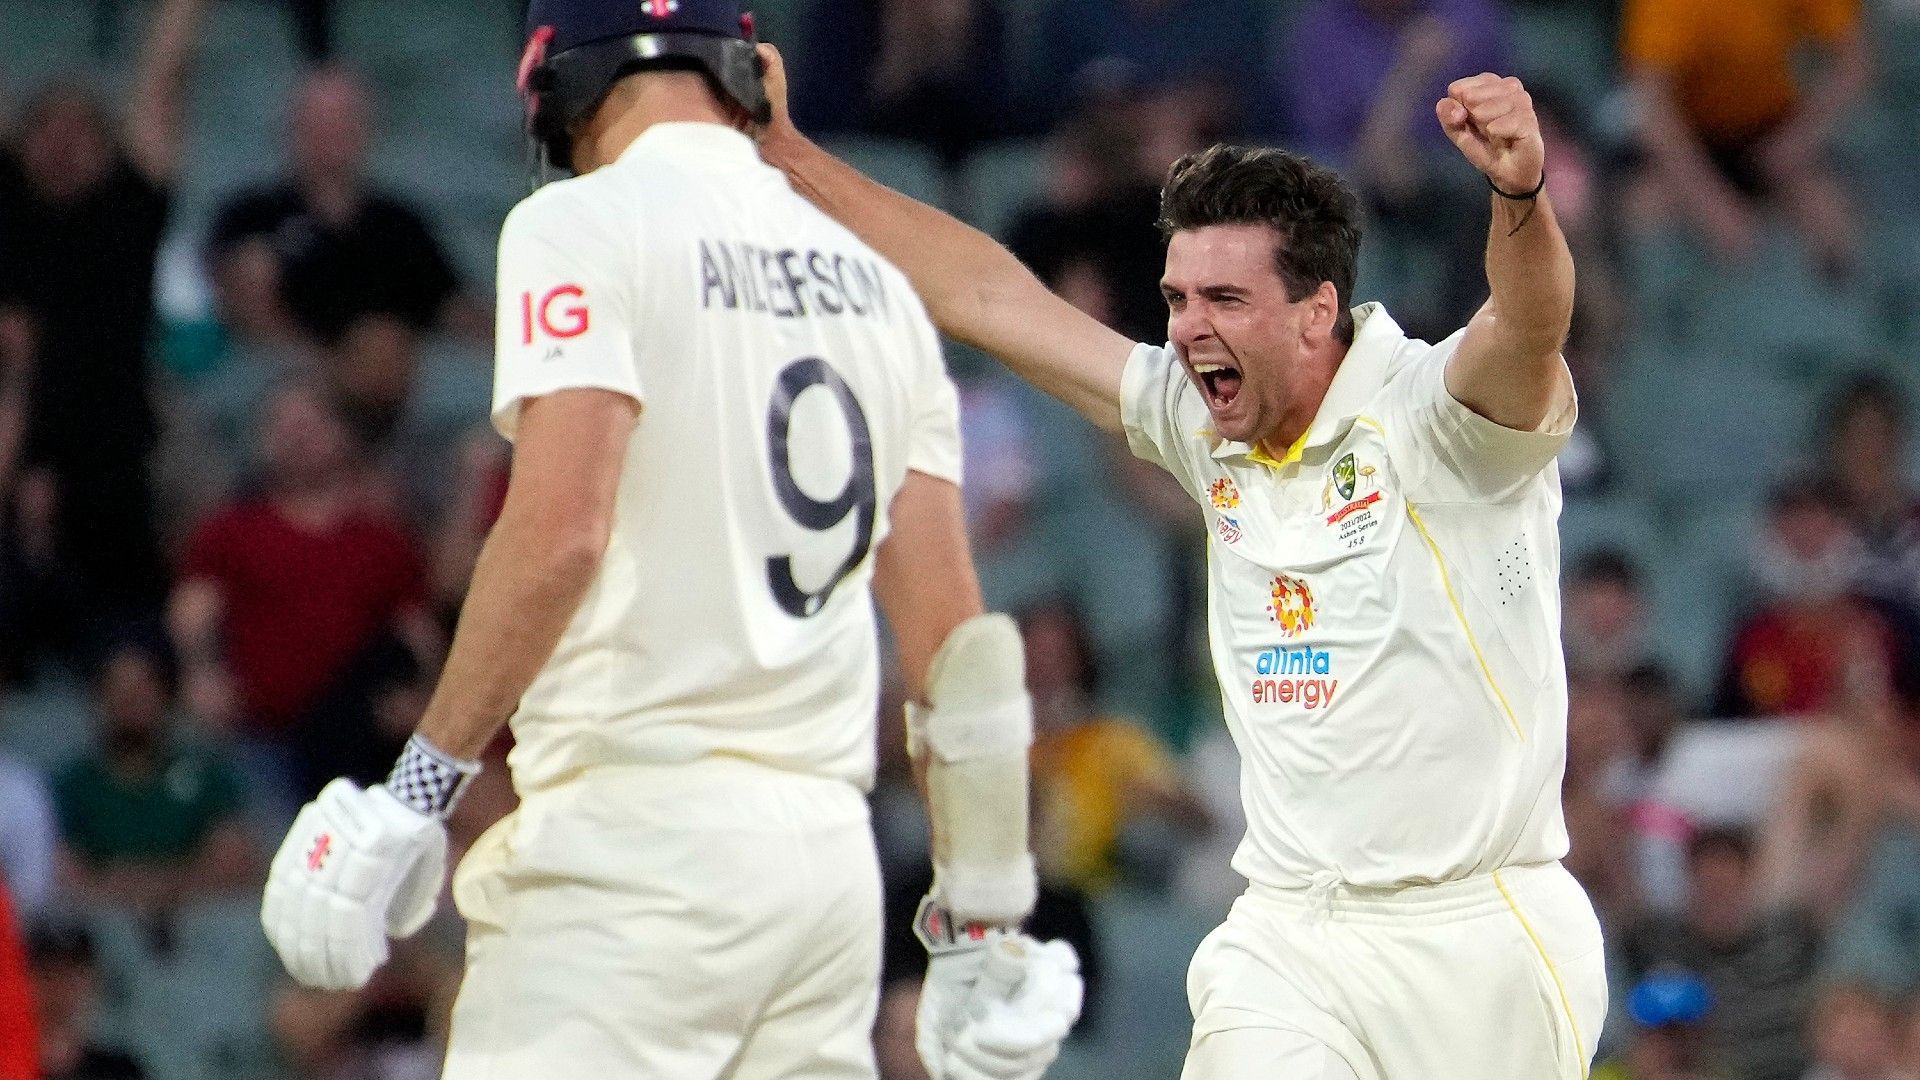 Australia produce crushing 275-run win over England, take giant step towards Ashes series victory